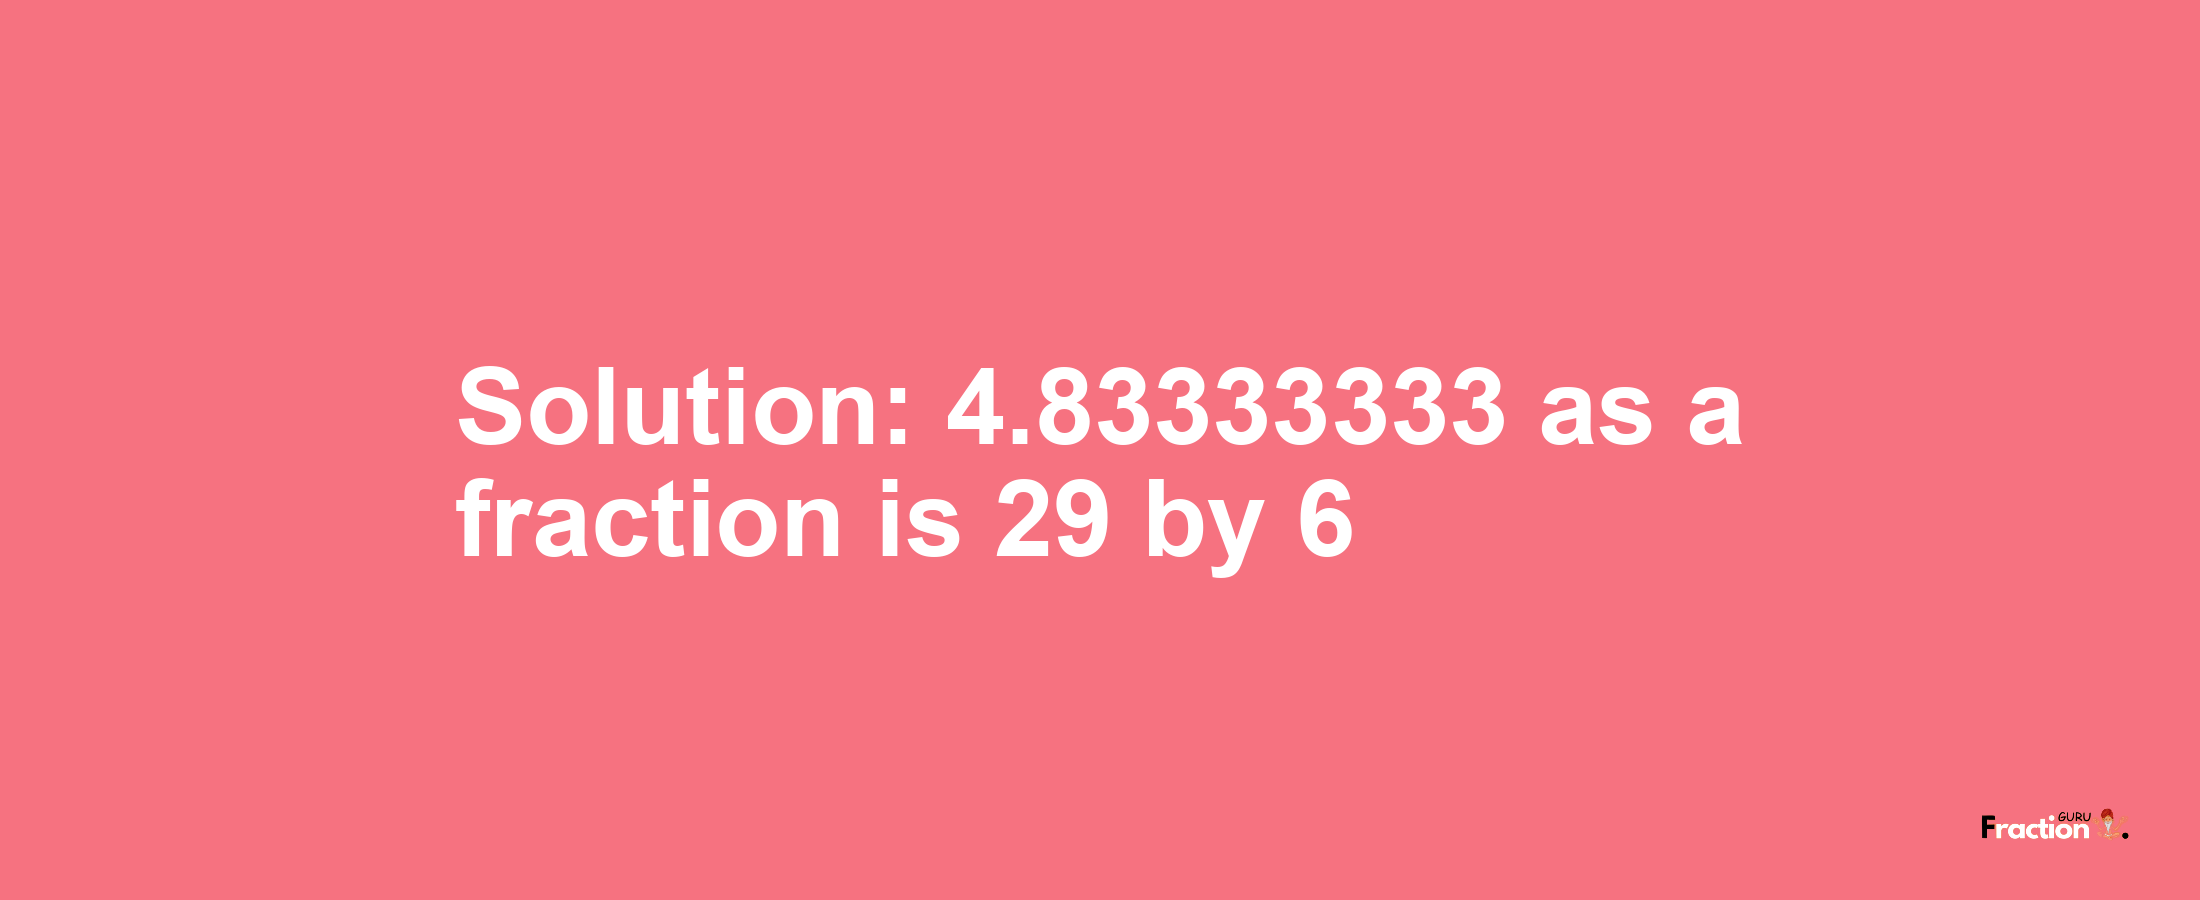 Solution:4.83333333 as a fraction is 29/6